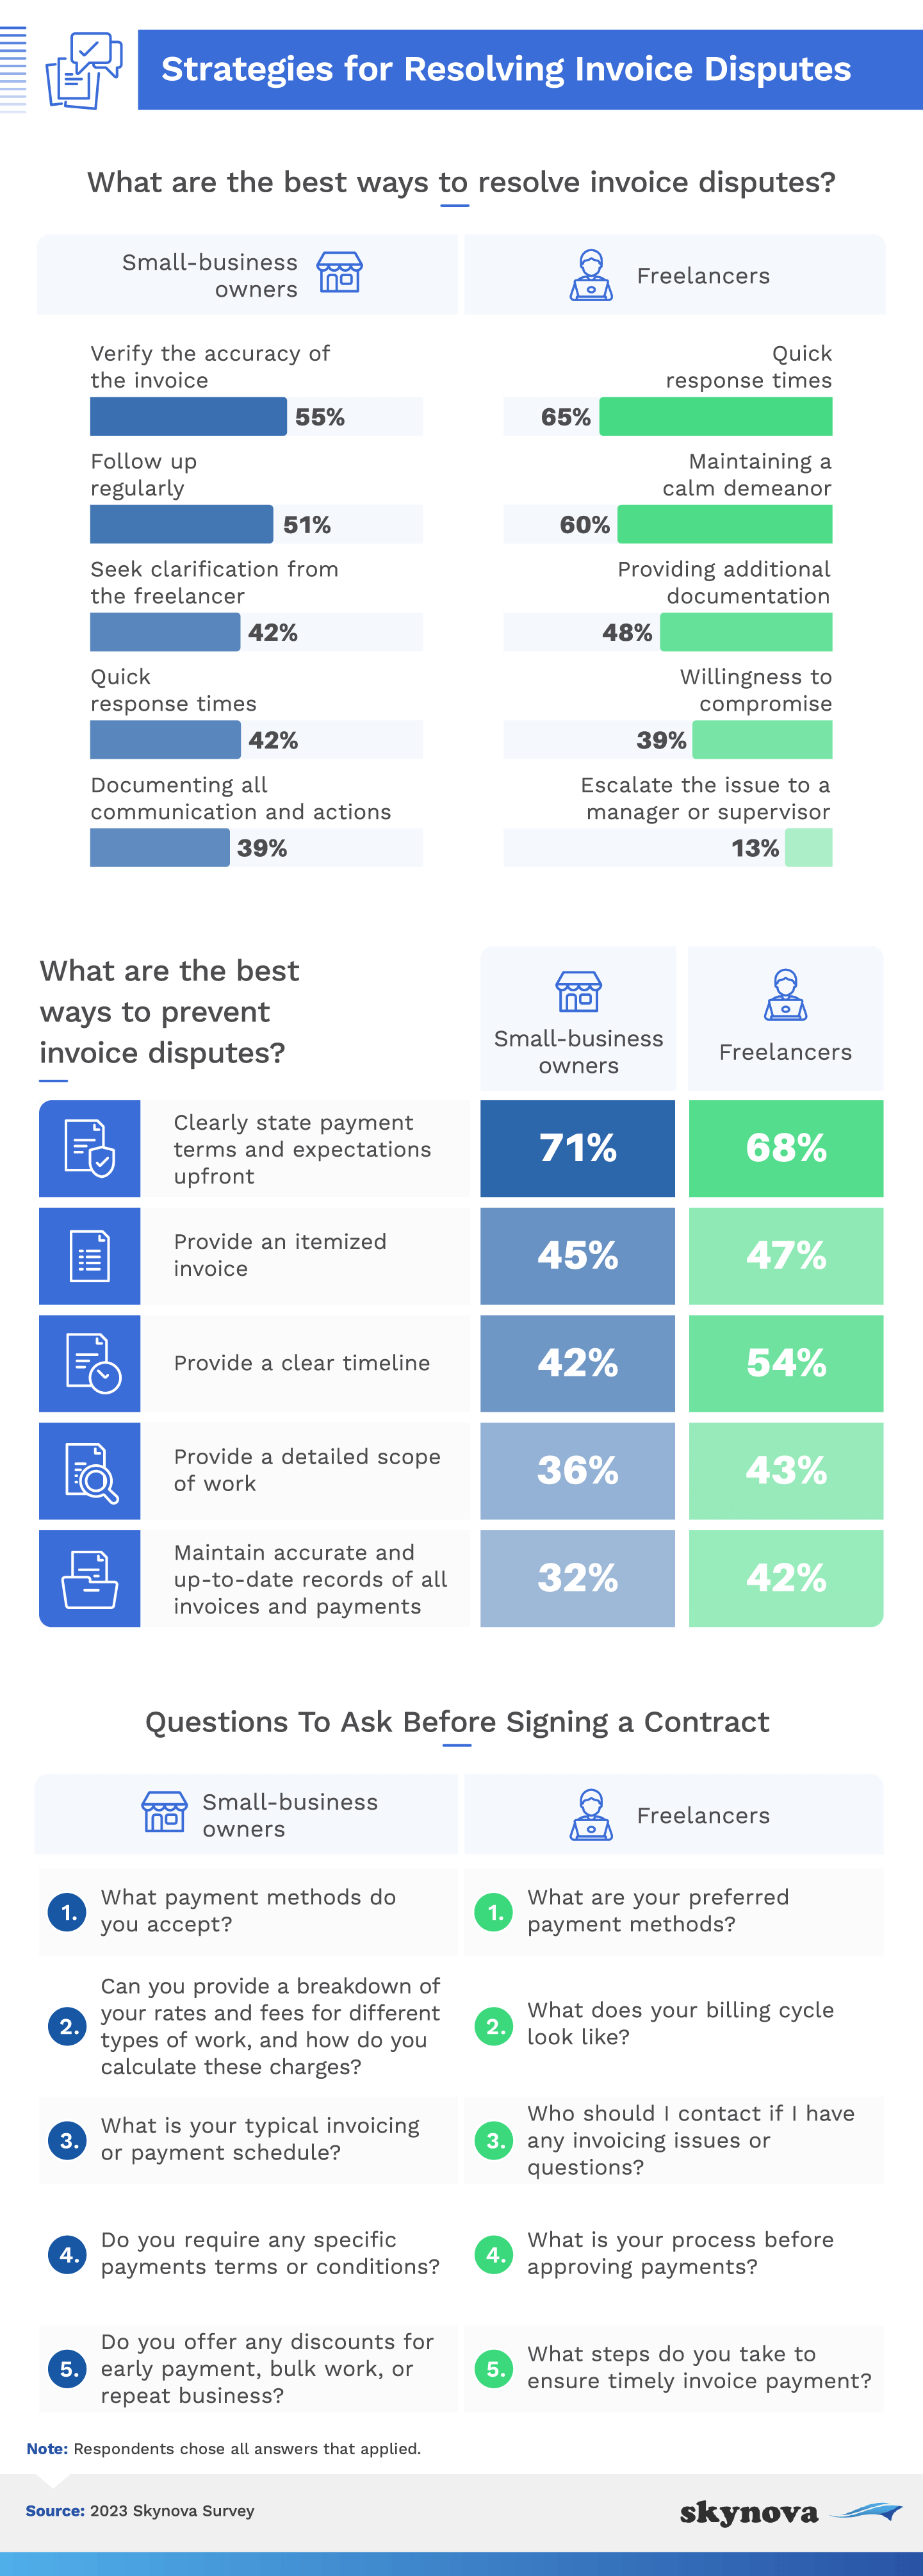 Survey: Ways to prevent and resolve invoice disputes